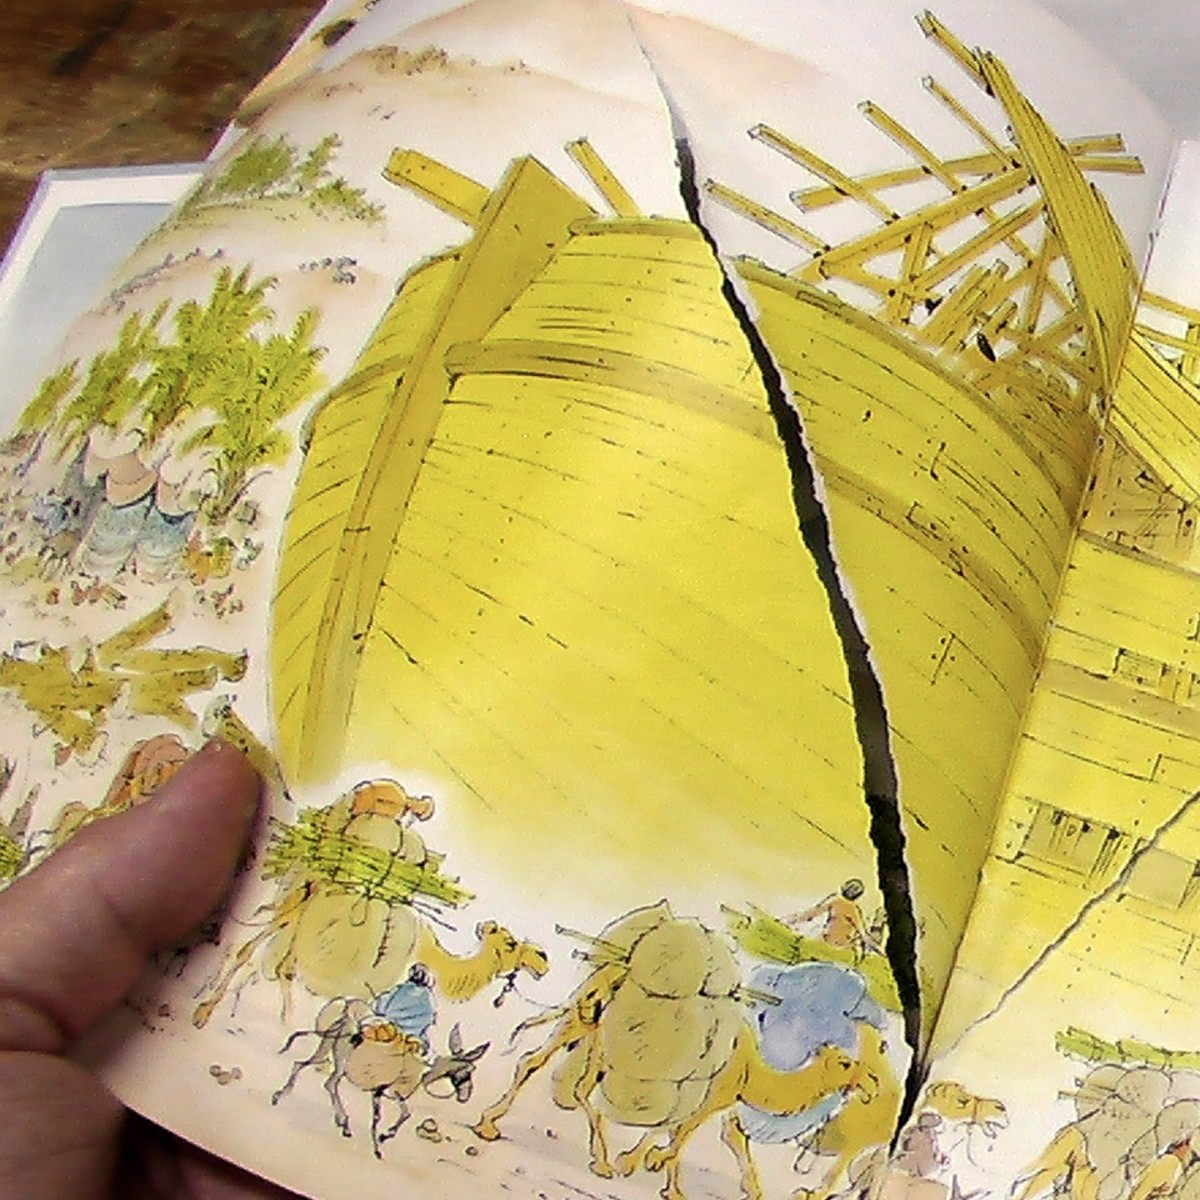 How to Repair a Torn Page in a Book